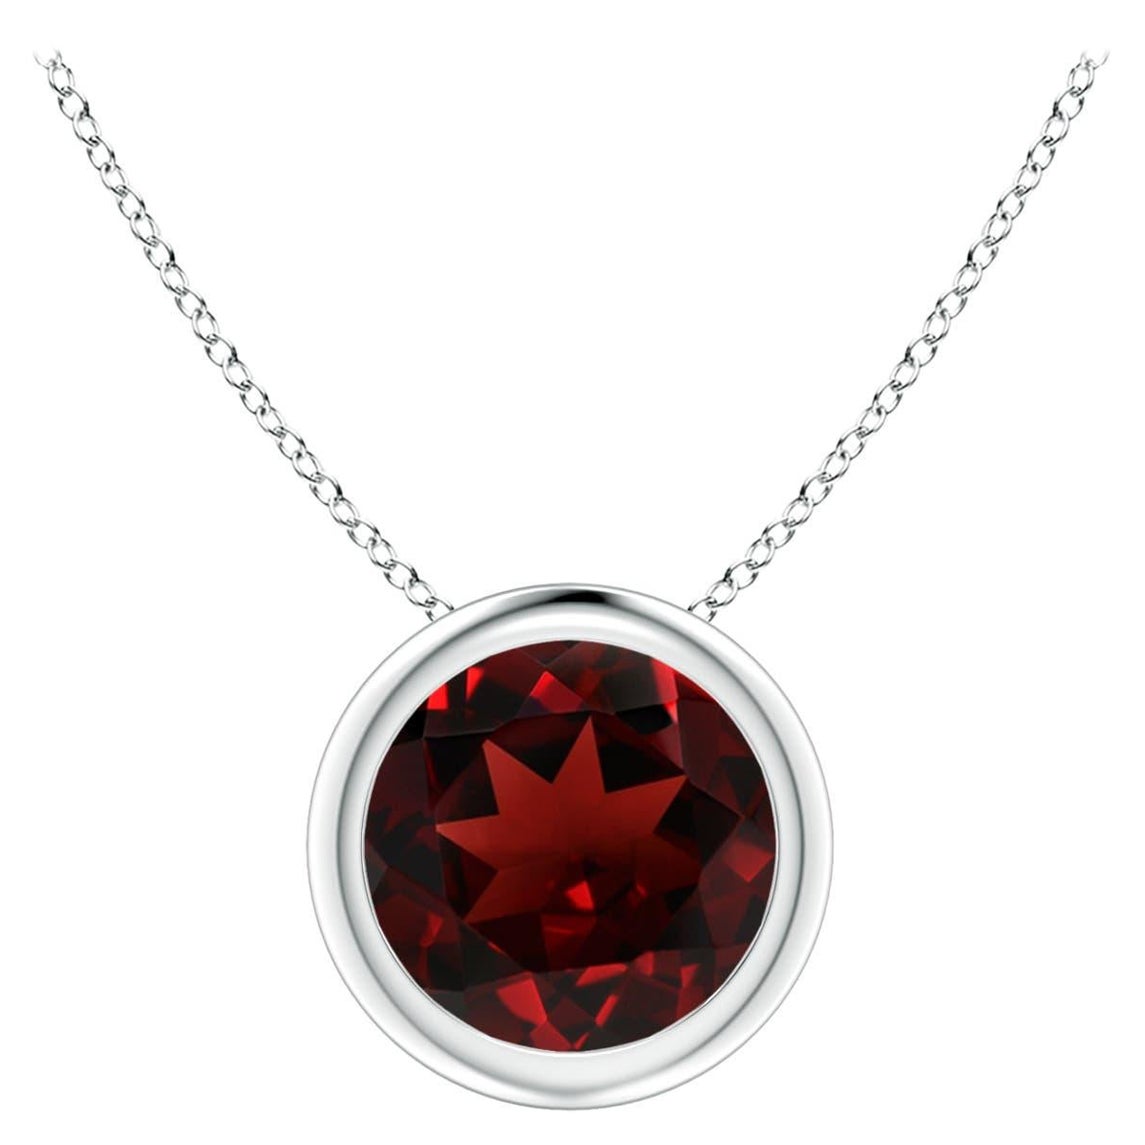 Natural Bezel-Set Round 1.5ct Garnet Solitaire Pendant in 14K White Gold For Sale